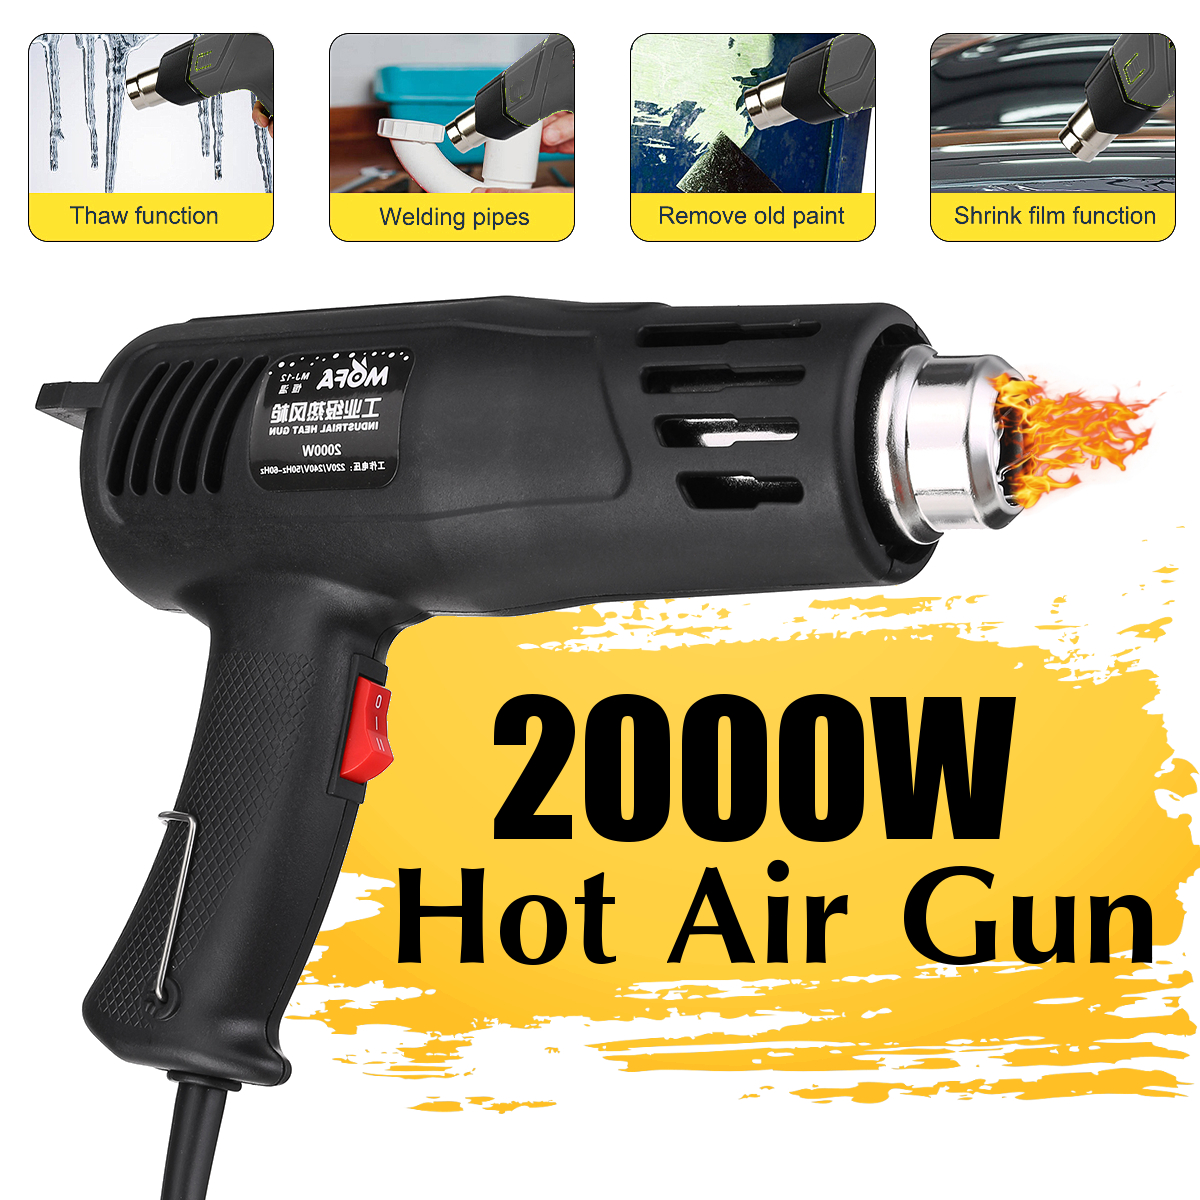 2000W-220V-Industrial-Electric-Hot-Air-Guns-Adjustable-Thermoregulator-Air-Flow-Heat-Welding-Torch-f-1688931-2